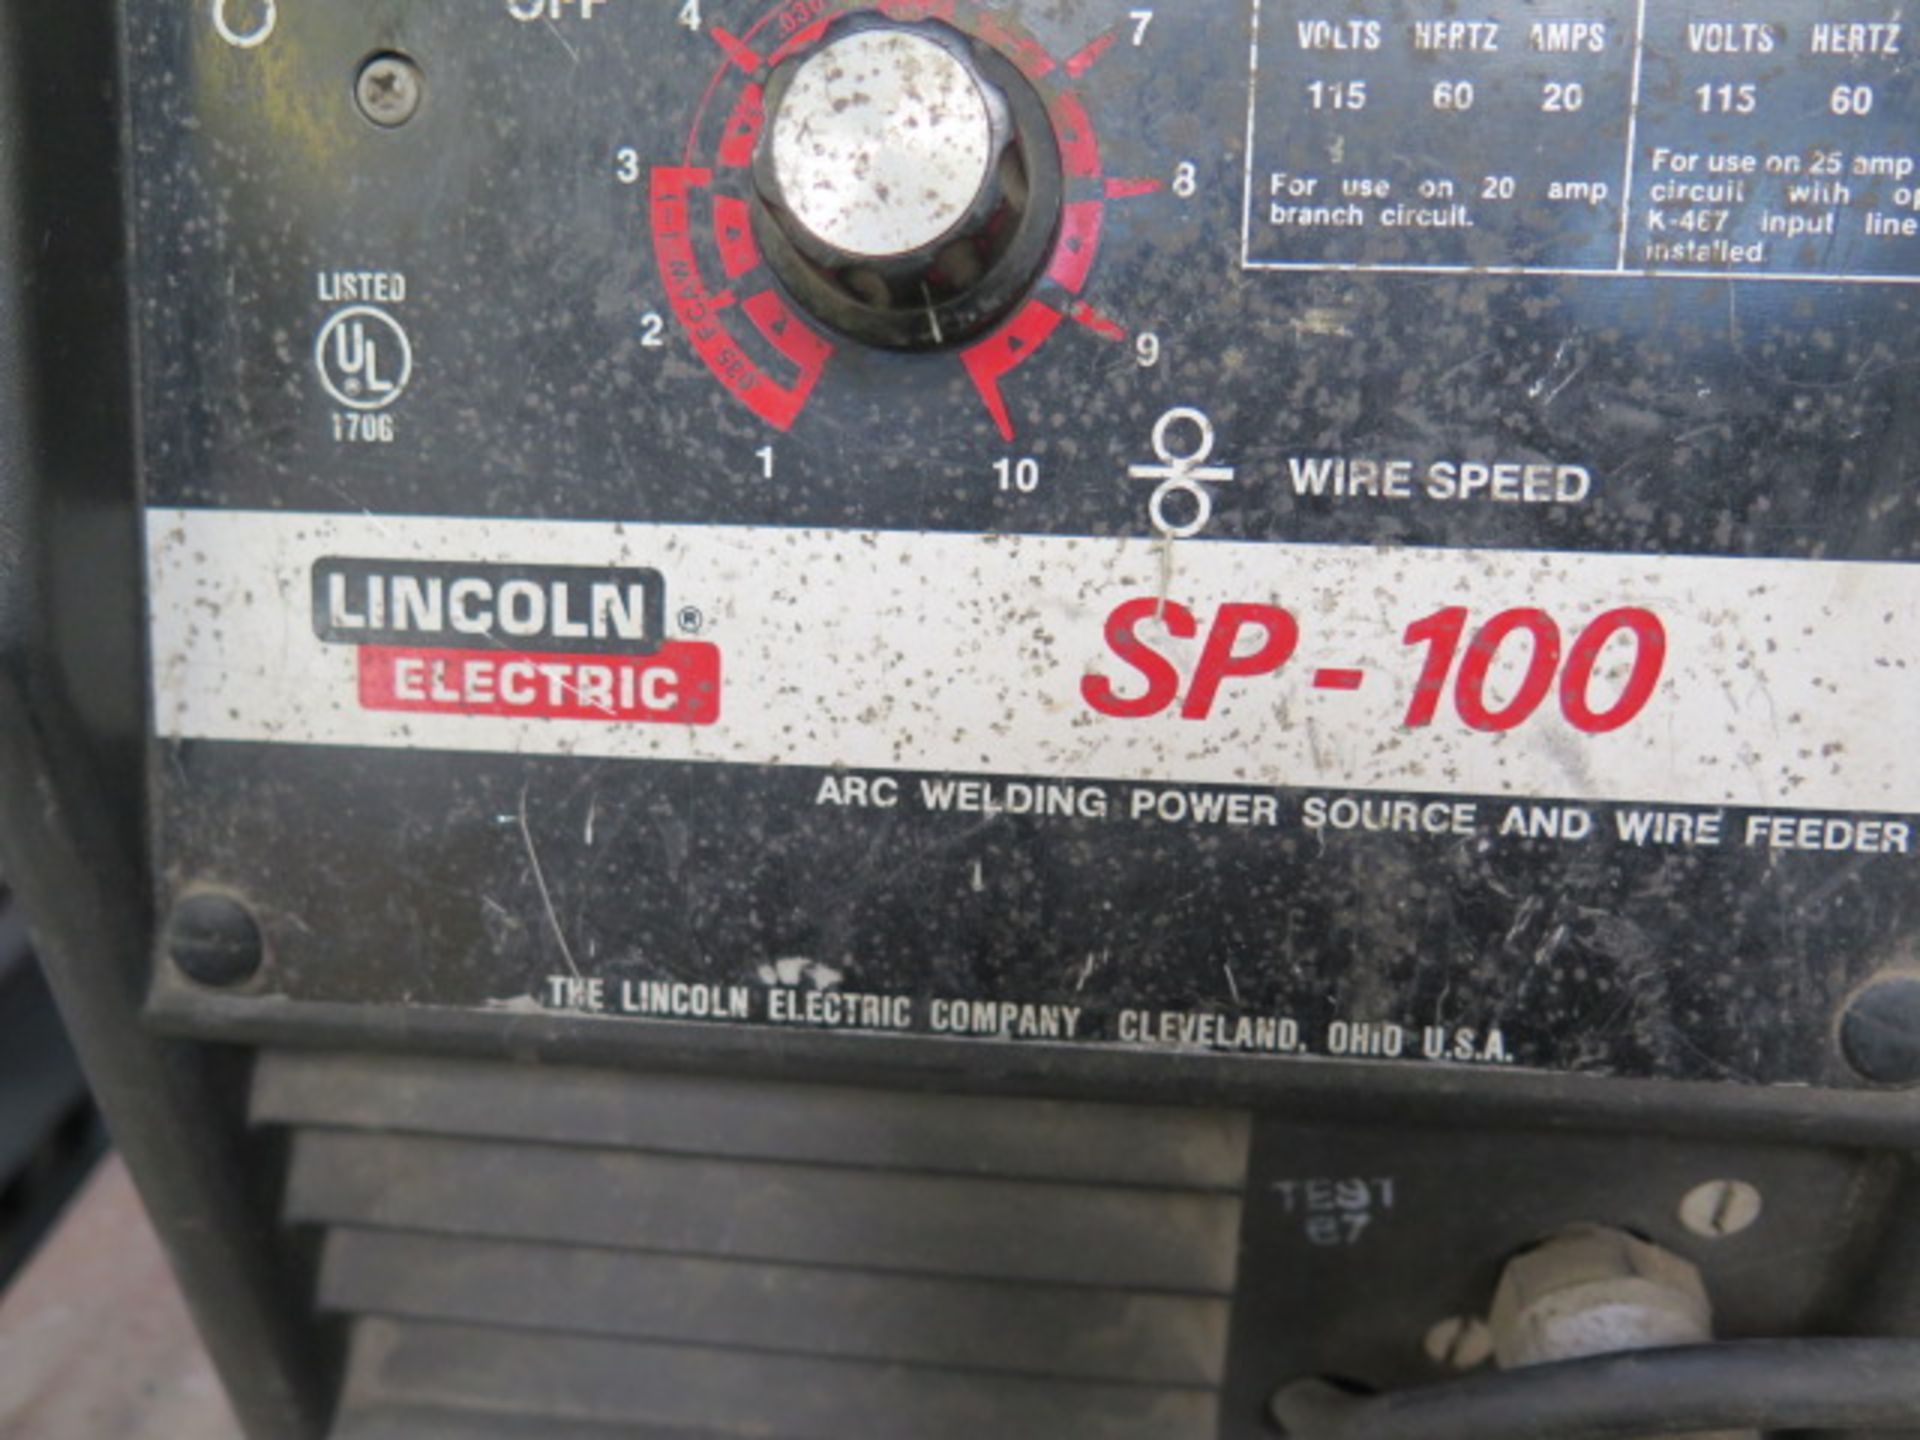 Lincoln SP-100 110 Volt Arc Welding Power Source and Wire Feeder (SOLD AS-IS - NO WARRANTY) - Image 6 of 6